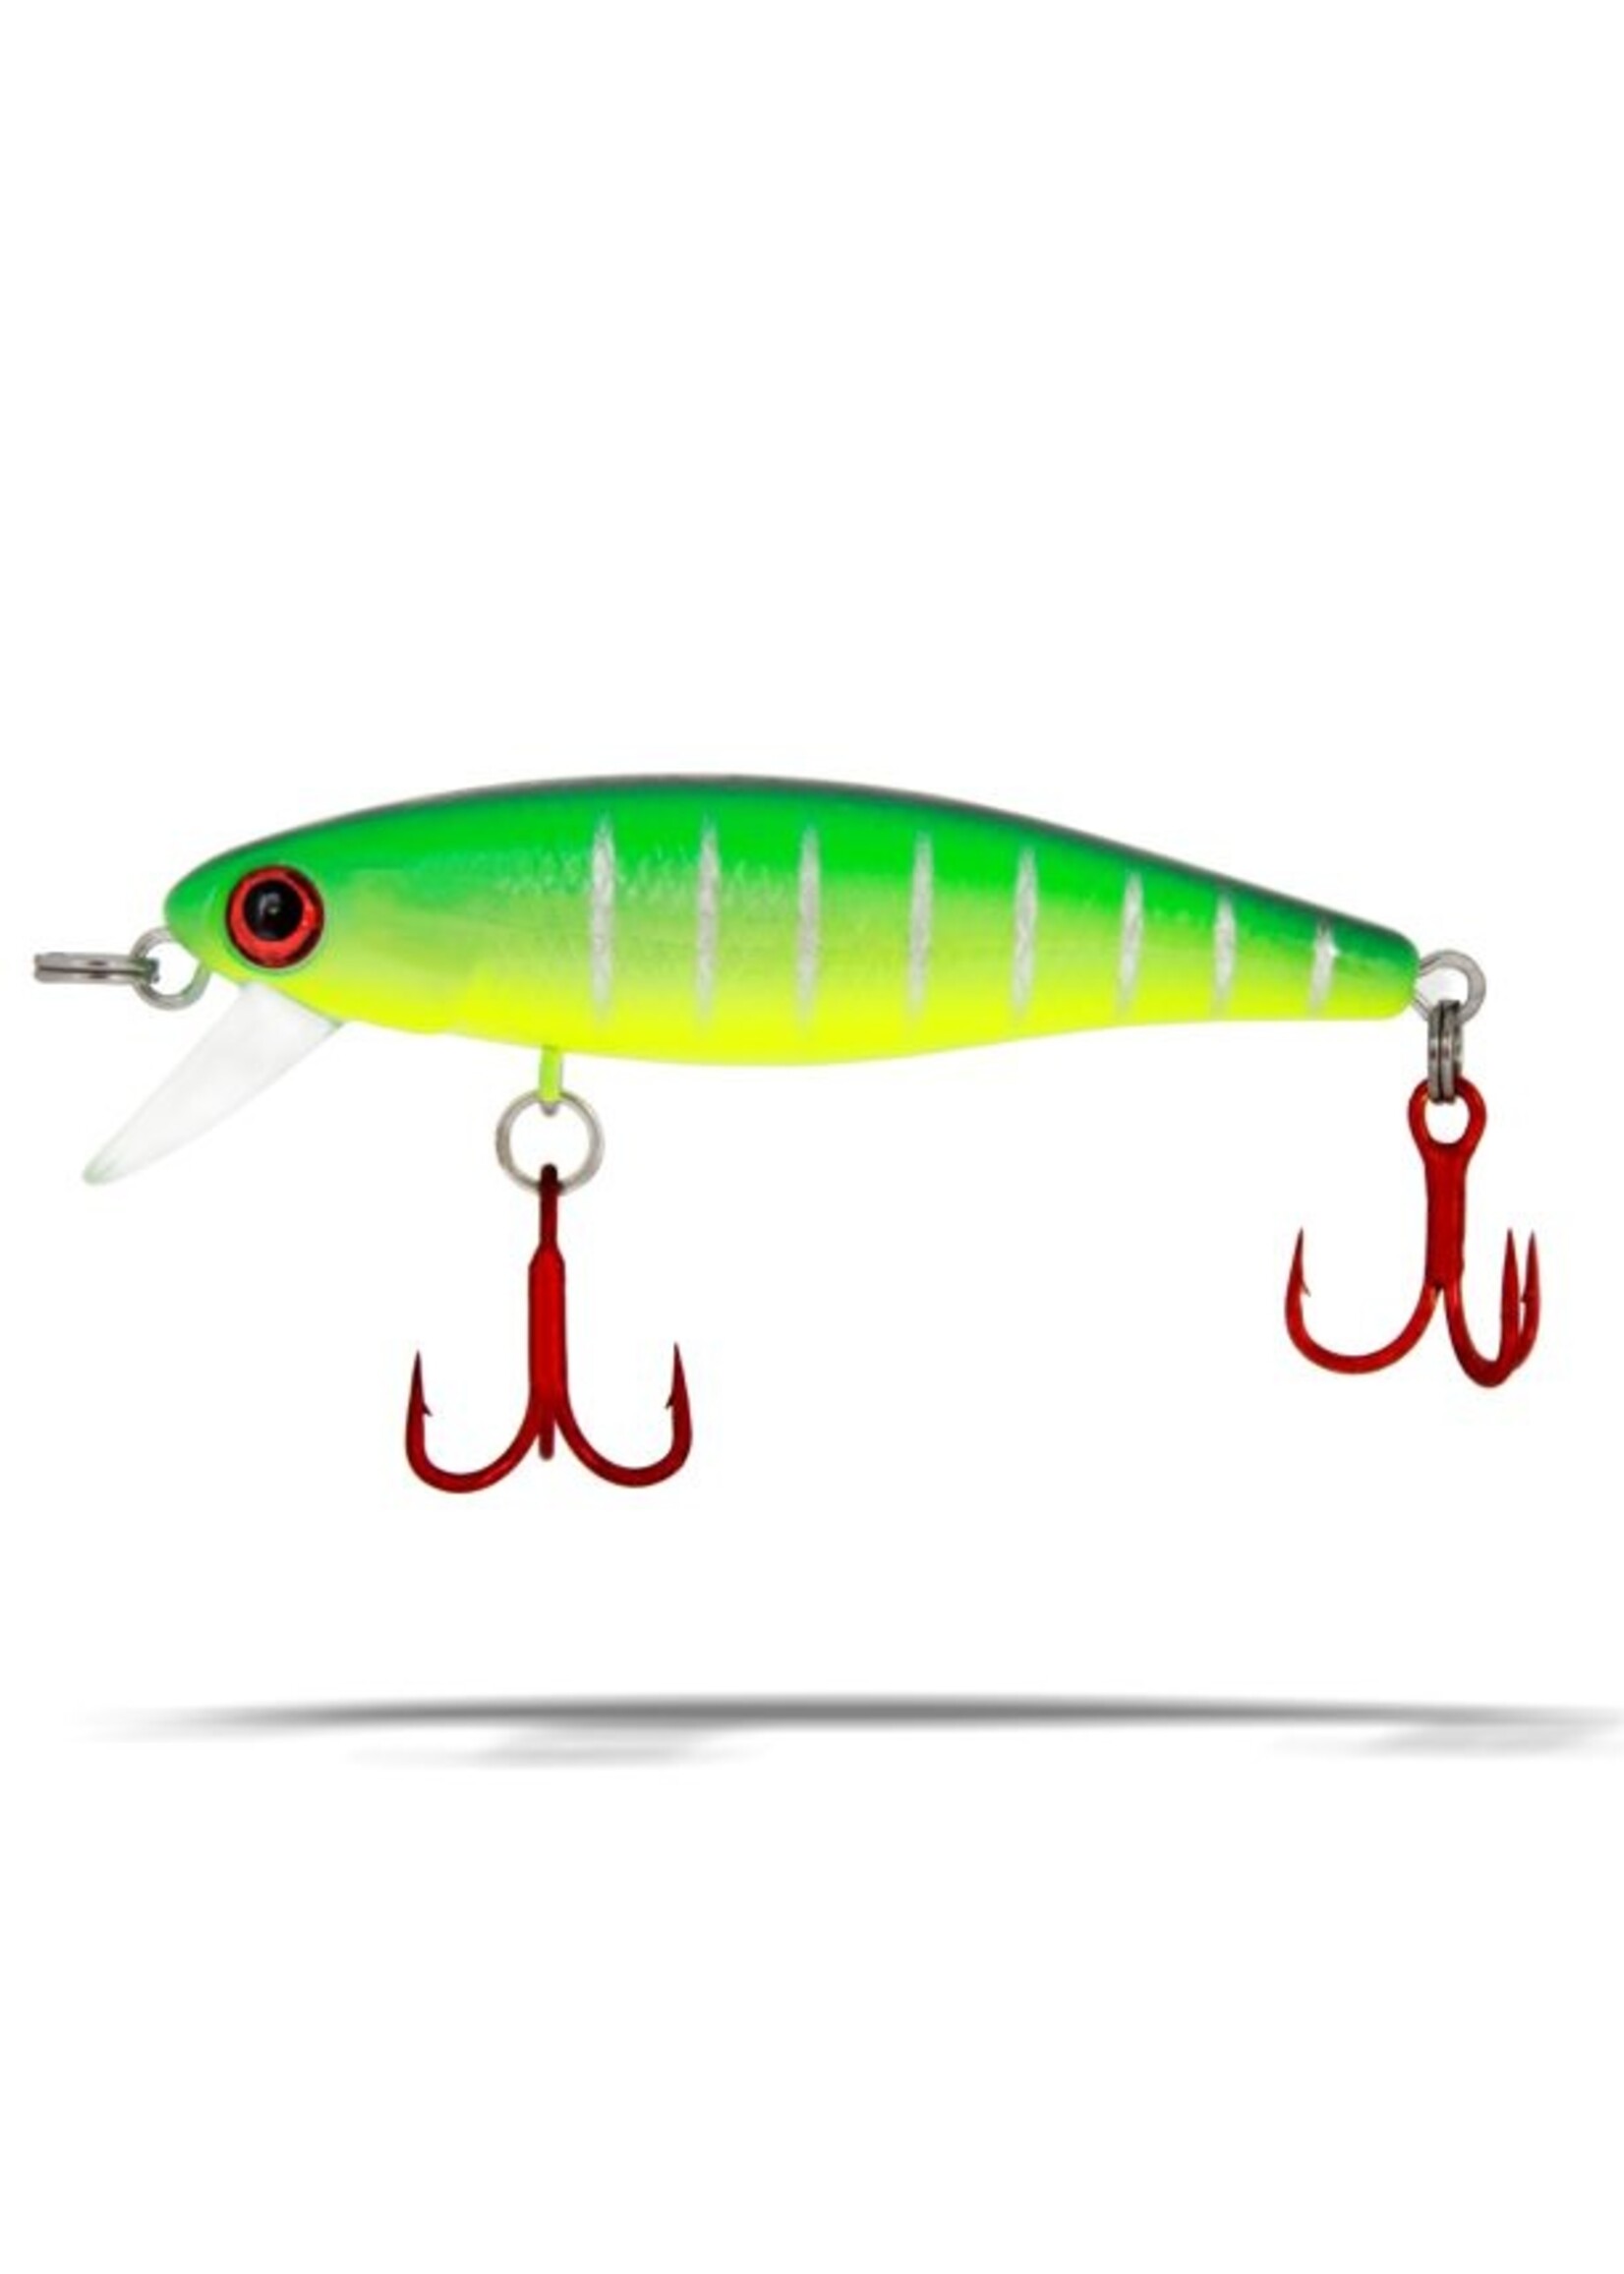 Dynamic Lures HD Trout - Discount Fishing Tackle